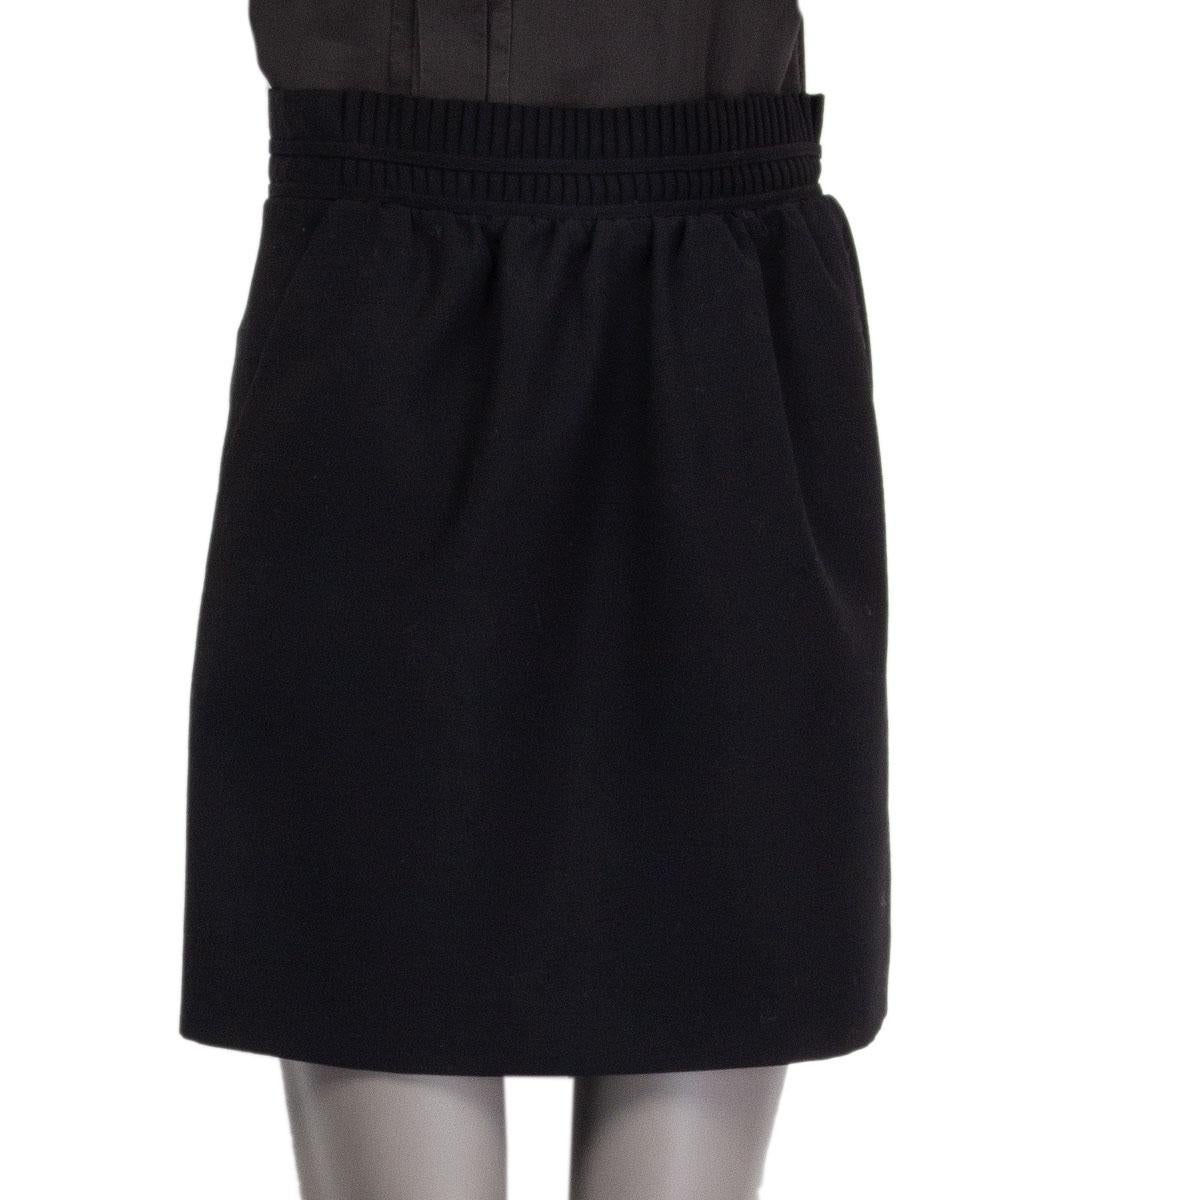 authentic Chloé straight skirt in black wool (100%) with pleated waist part at front and two slit pockets on the side. Opens with a zipper on the side and is lined in cotton (100%). Has been worn and is in excellent condition. 

Tag Size 34
Size